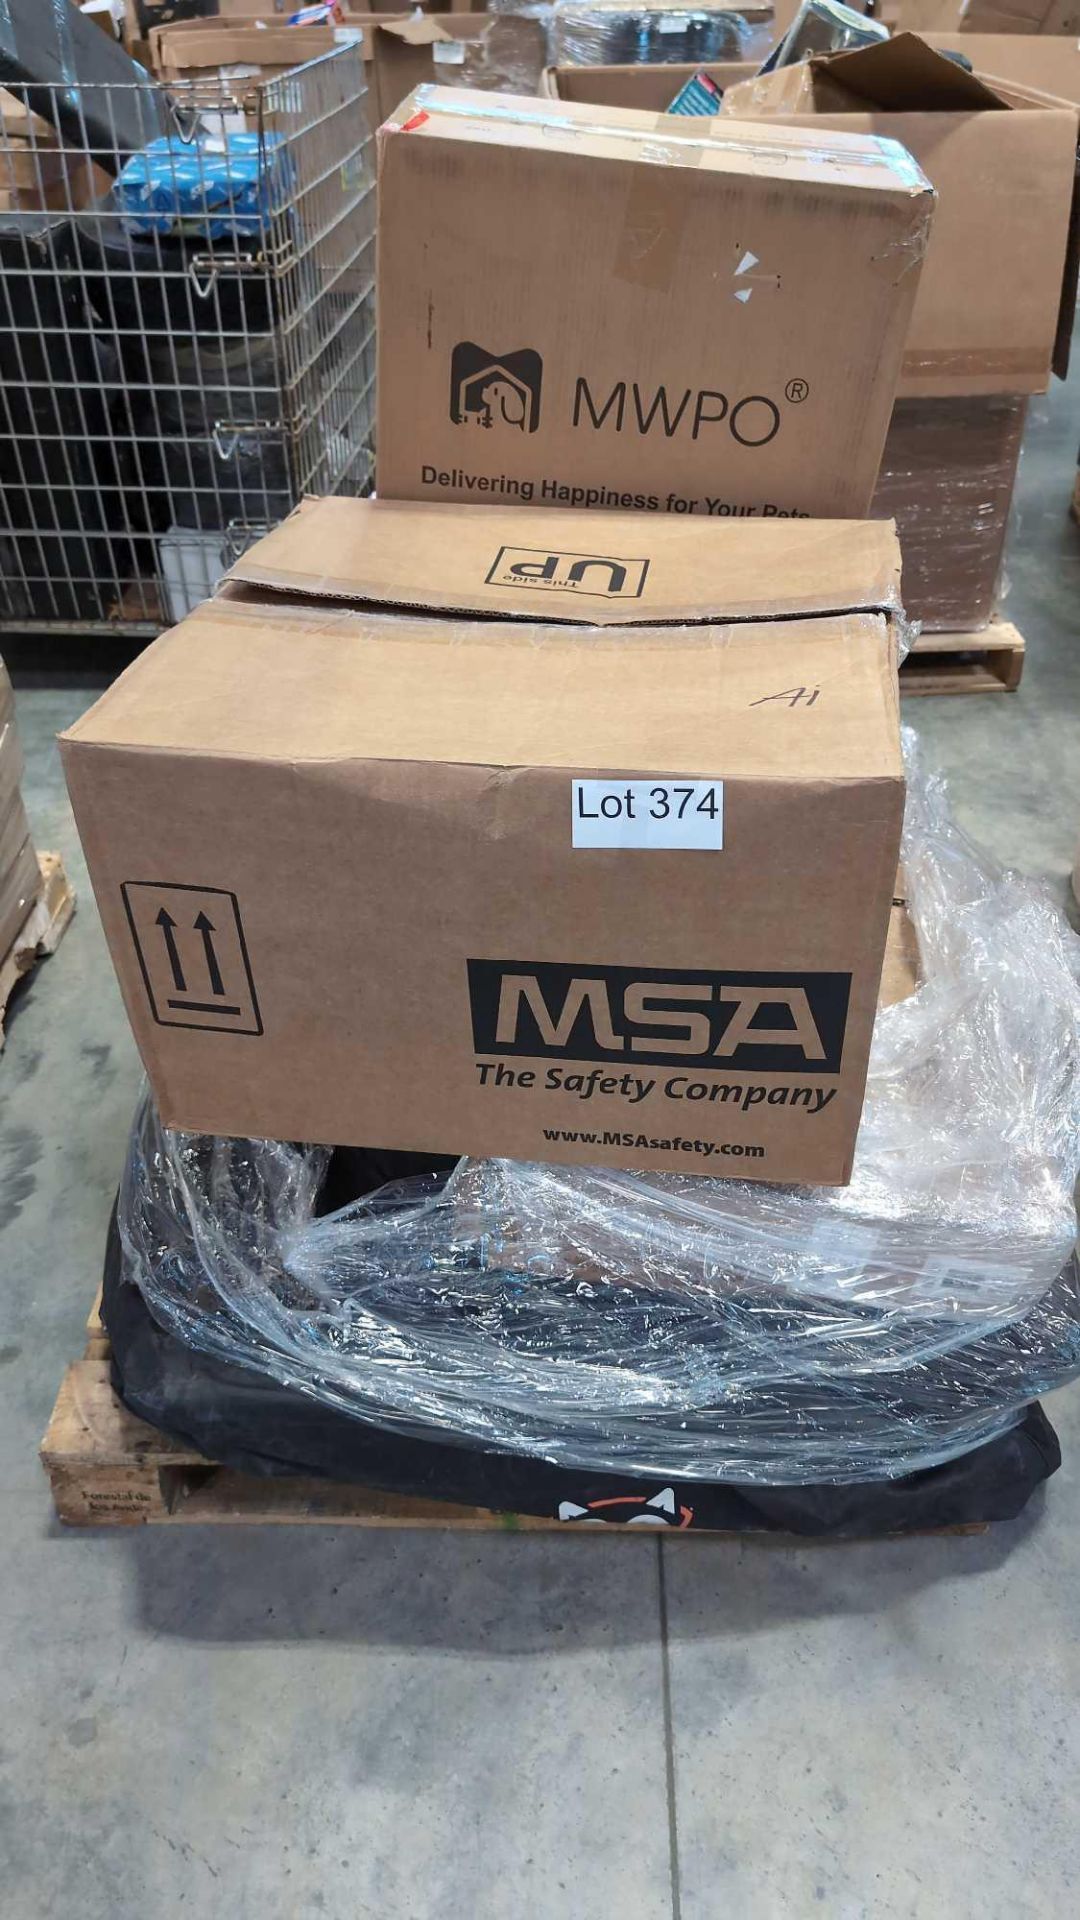 MSA Hard Hats, righline gear, pet supplies and more